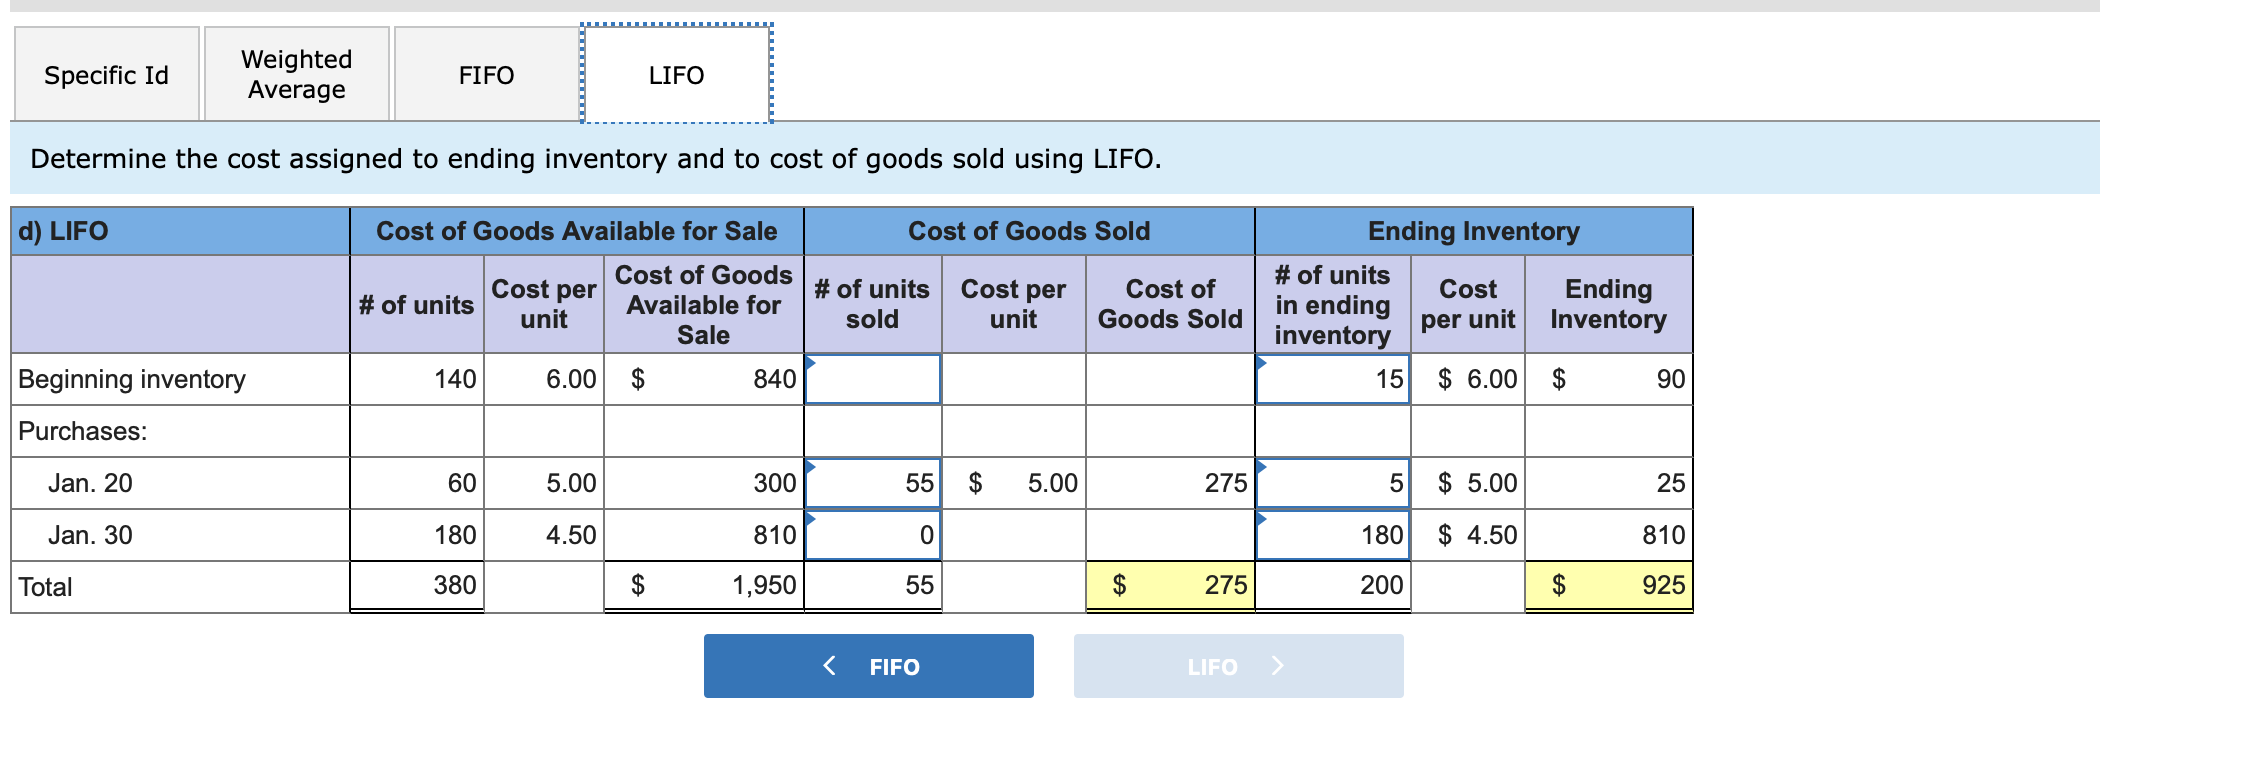 Weighted
Average
Specific Id
FIFO
LIFO
Determine the cost assigned to ending inventory and to cost of goods sold using LIFO.
d) LIFO
Cost of Goods Available for Sale
Cost of Goods Sold
Ending Inventory
# of units
in ending
Cost of Goods
#of units Cost per
unit
# of units
Cost per
unit
Ending
Inventory
Cost of
Cost
Available for
inventory per unit
15 6.00 $
Goods Sold
sold
Sale
Beginning inventory
6.00 $
140
840
90
Purchases:
5 5.00
55$
Jan. 20
60
5.00
300
5.00
275
25
$ 4.50
Jan. 30
180
4.50
810
180
810
$
$
$
Total
380
1,950
925
55
275
200
FIFO
LIFO
